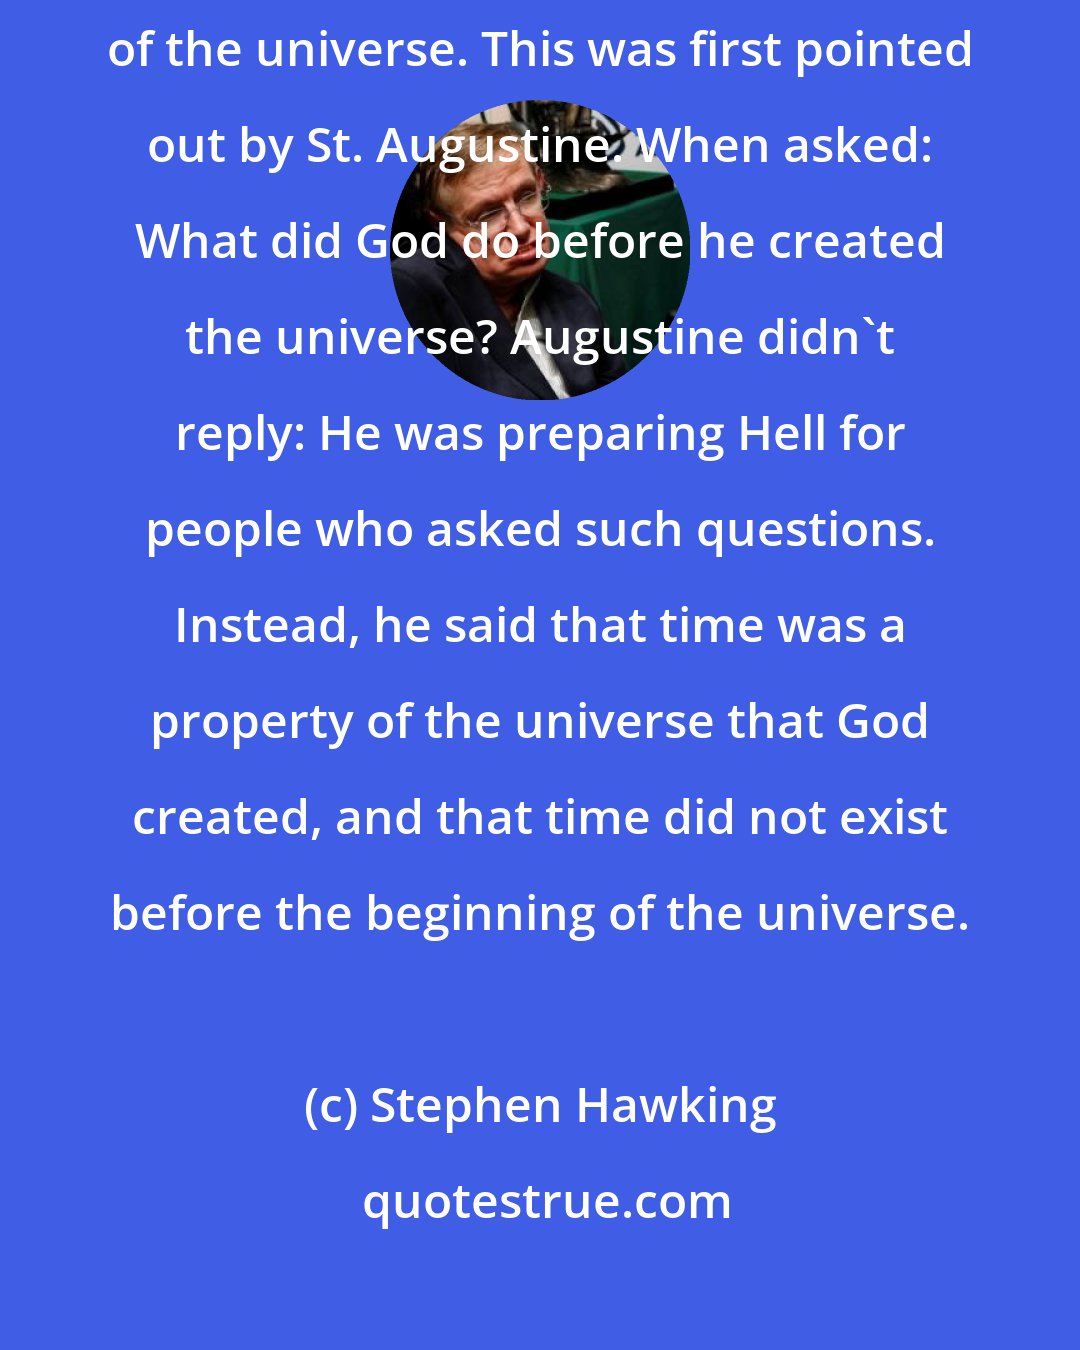 Stephen Hawking: As we shall see, the concept of time has no meaning before the beginning of the universe. This was first pointed out by St. Augustine. When asked: What did God do before he created the universe? Augustine didn't reply: He was preparing Hell for people who asked such questions. Instead, he said that time was a property of the universe that God created, and that time did not exist before the beginning of the universe.